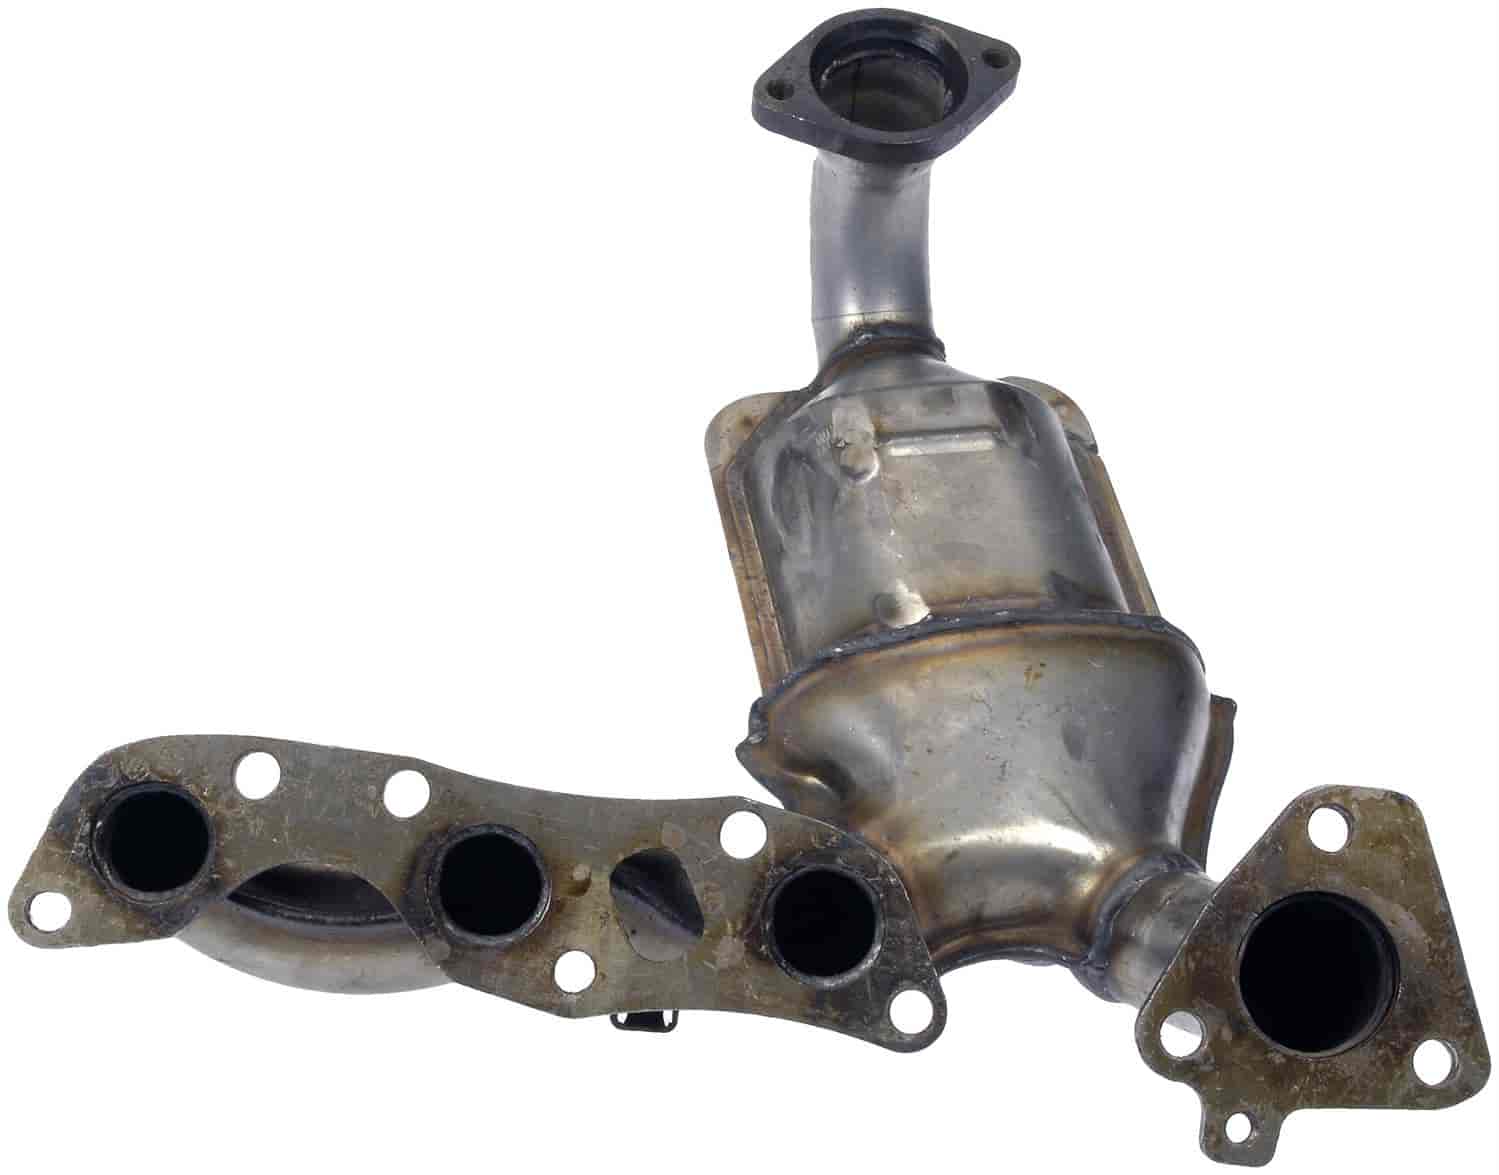 Manifold Converter - Carb Compliant - For Legal Sale In NY - CA